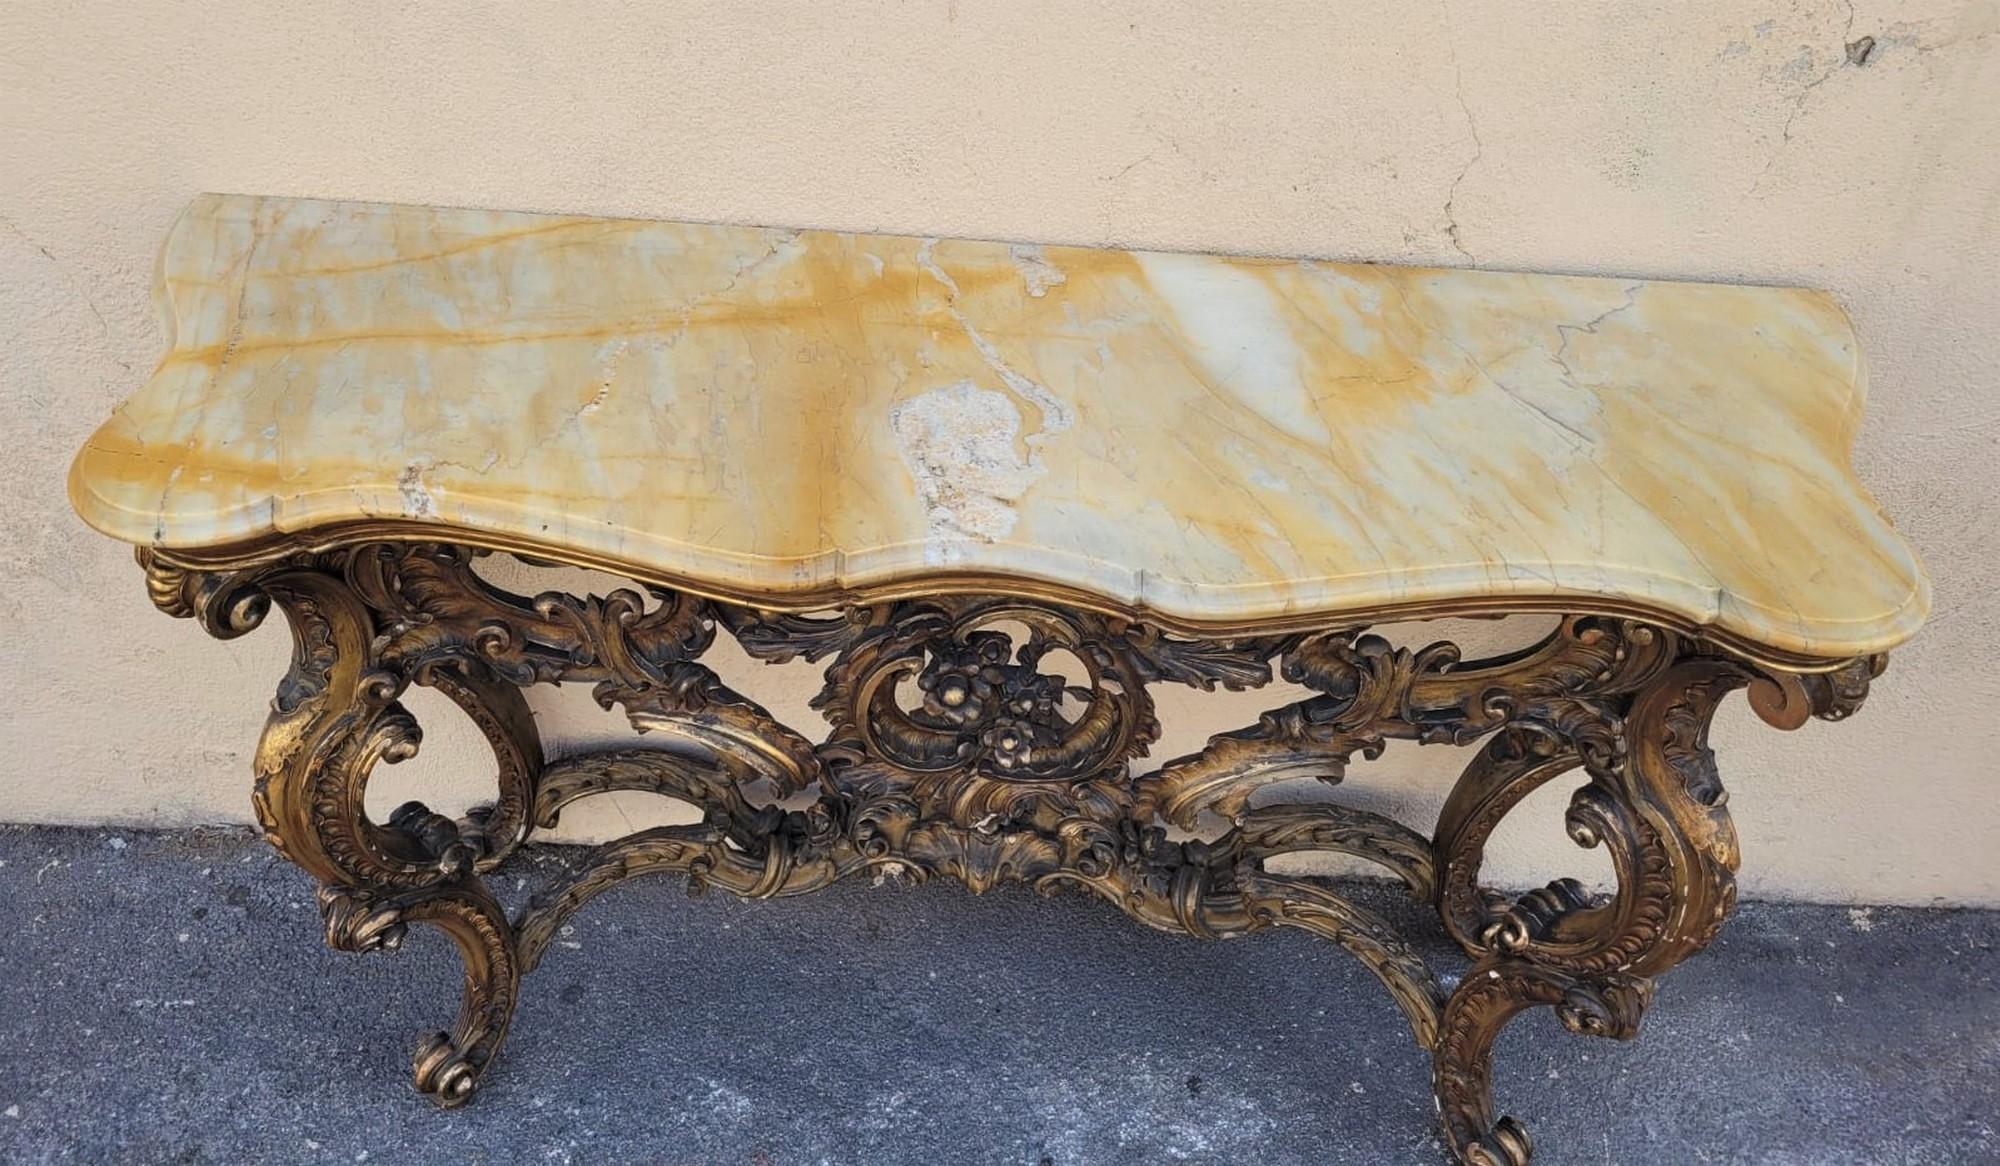 Large Louis XV style console in gilded wood and richly carved on the headband and the crosspiece; yellow marble top
Some chips and gaps in the gilding
Period late 19th century
Height 93cm
152 x 87cm.